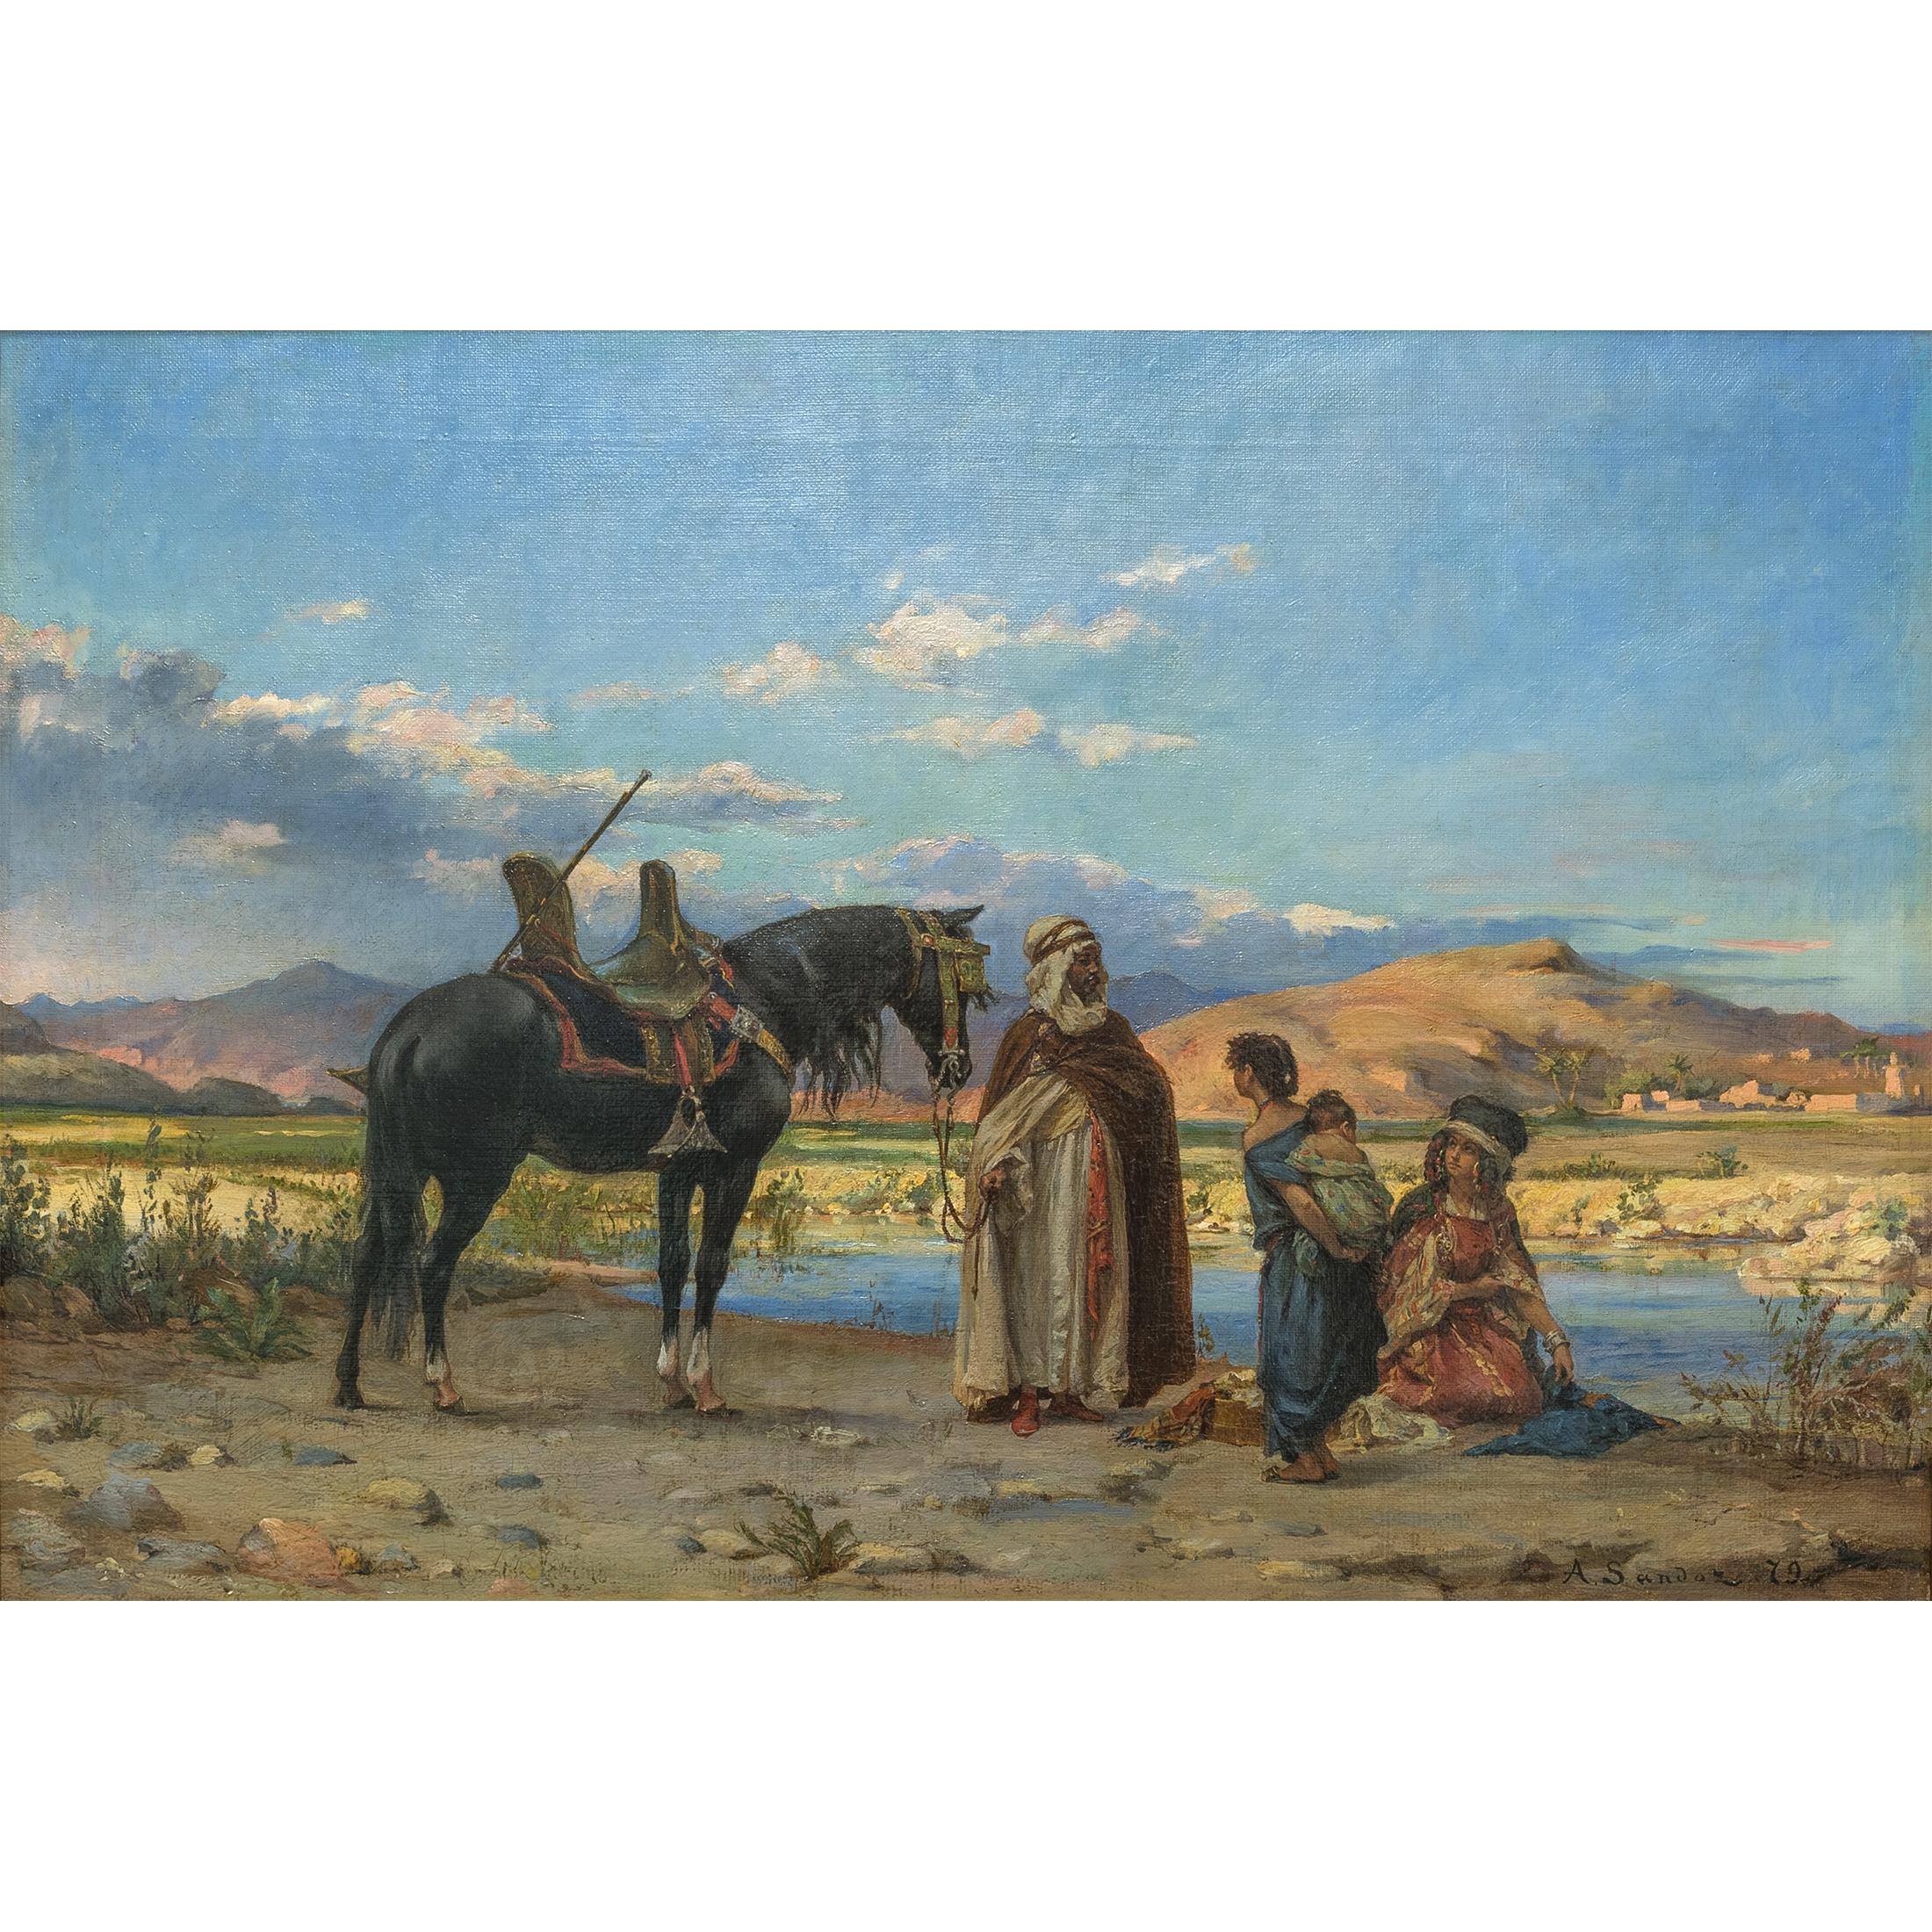 An exquisite orientalist painting entitled ‘At the Oasis’ by Adolf Karol Sandoz.

Title: At the Oasis
Artist: Adolf Karol Sandoz (b. 1845)
Origin: Polish
Date: circa 1879
Signature: signed and dated 'A. Sandoz .79' (LR)
Medium: oil on